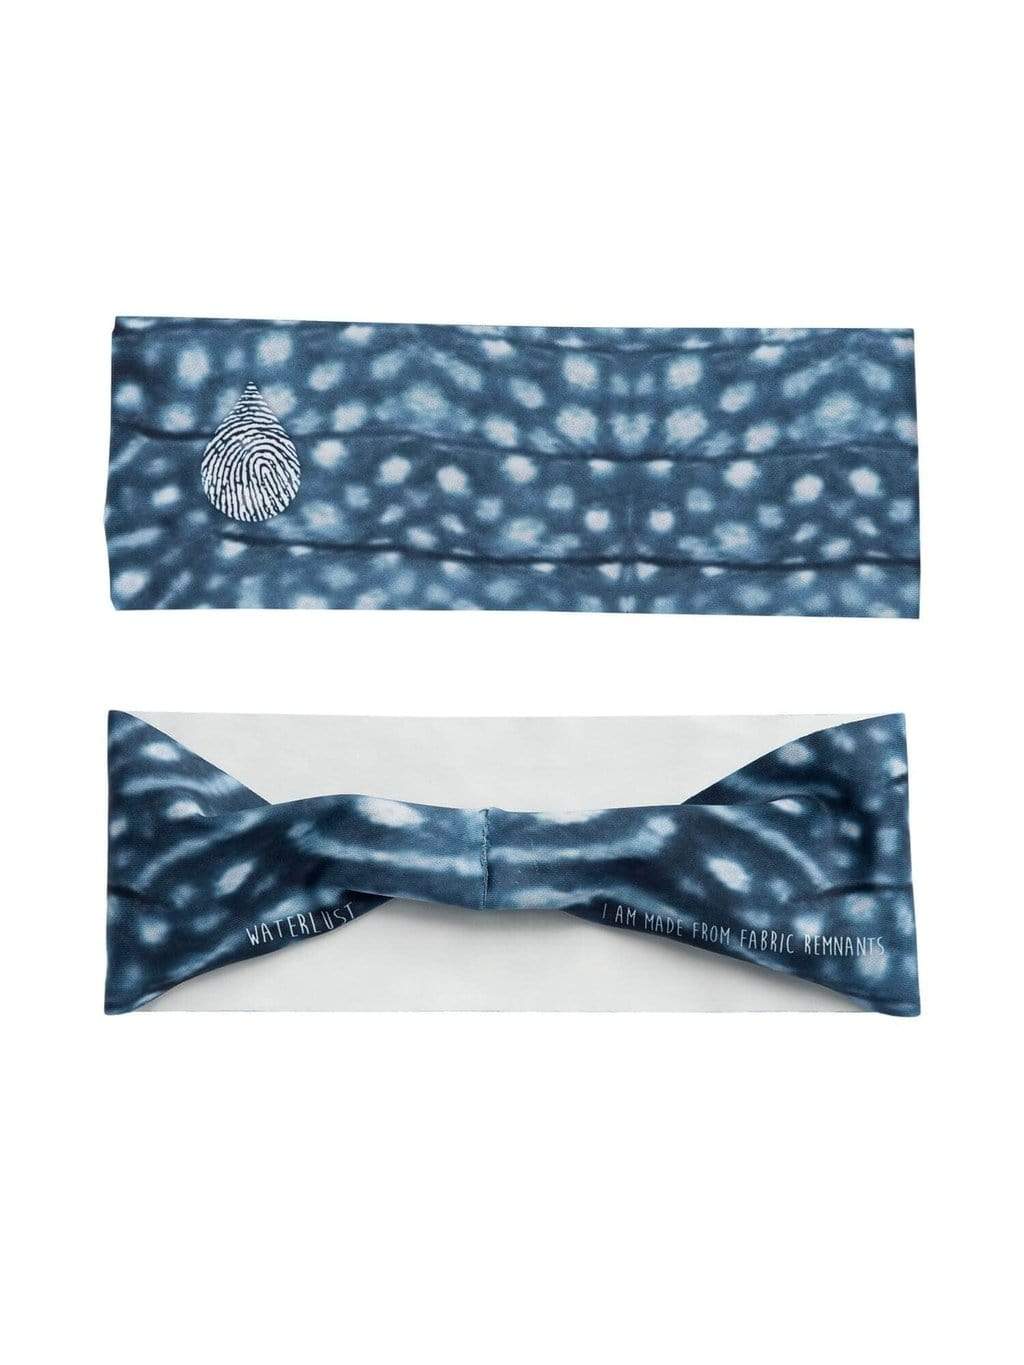 Waterlust Recycled Headband Made From Pre-Consumer Waste